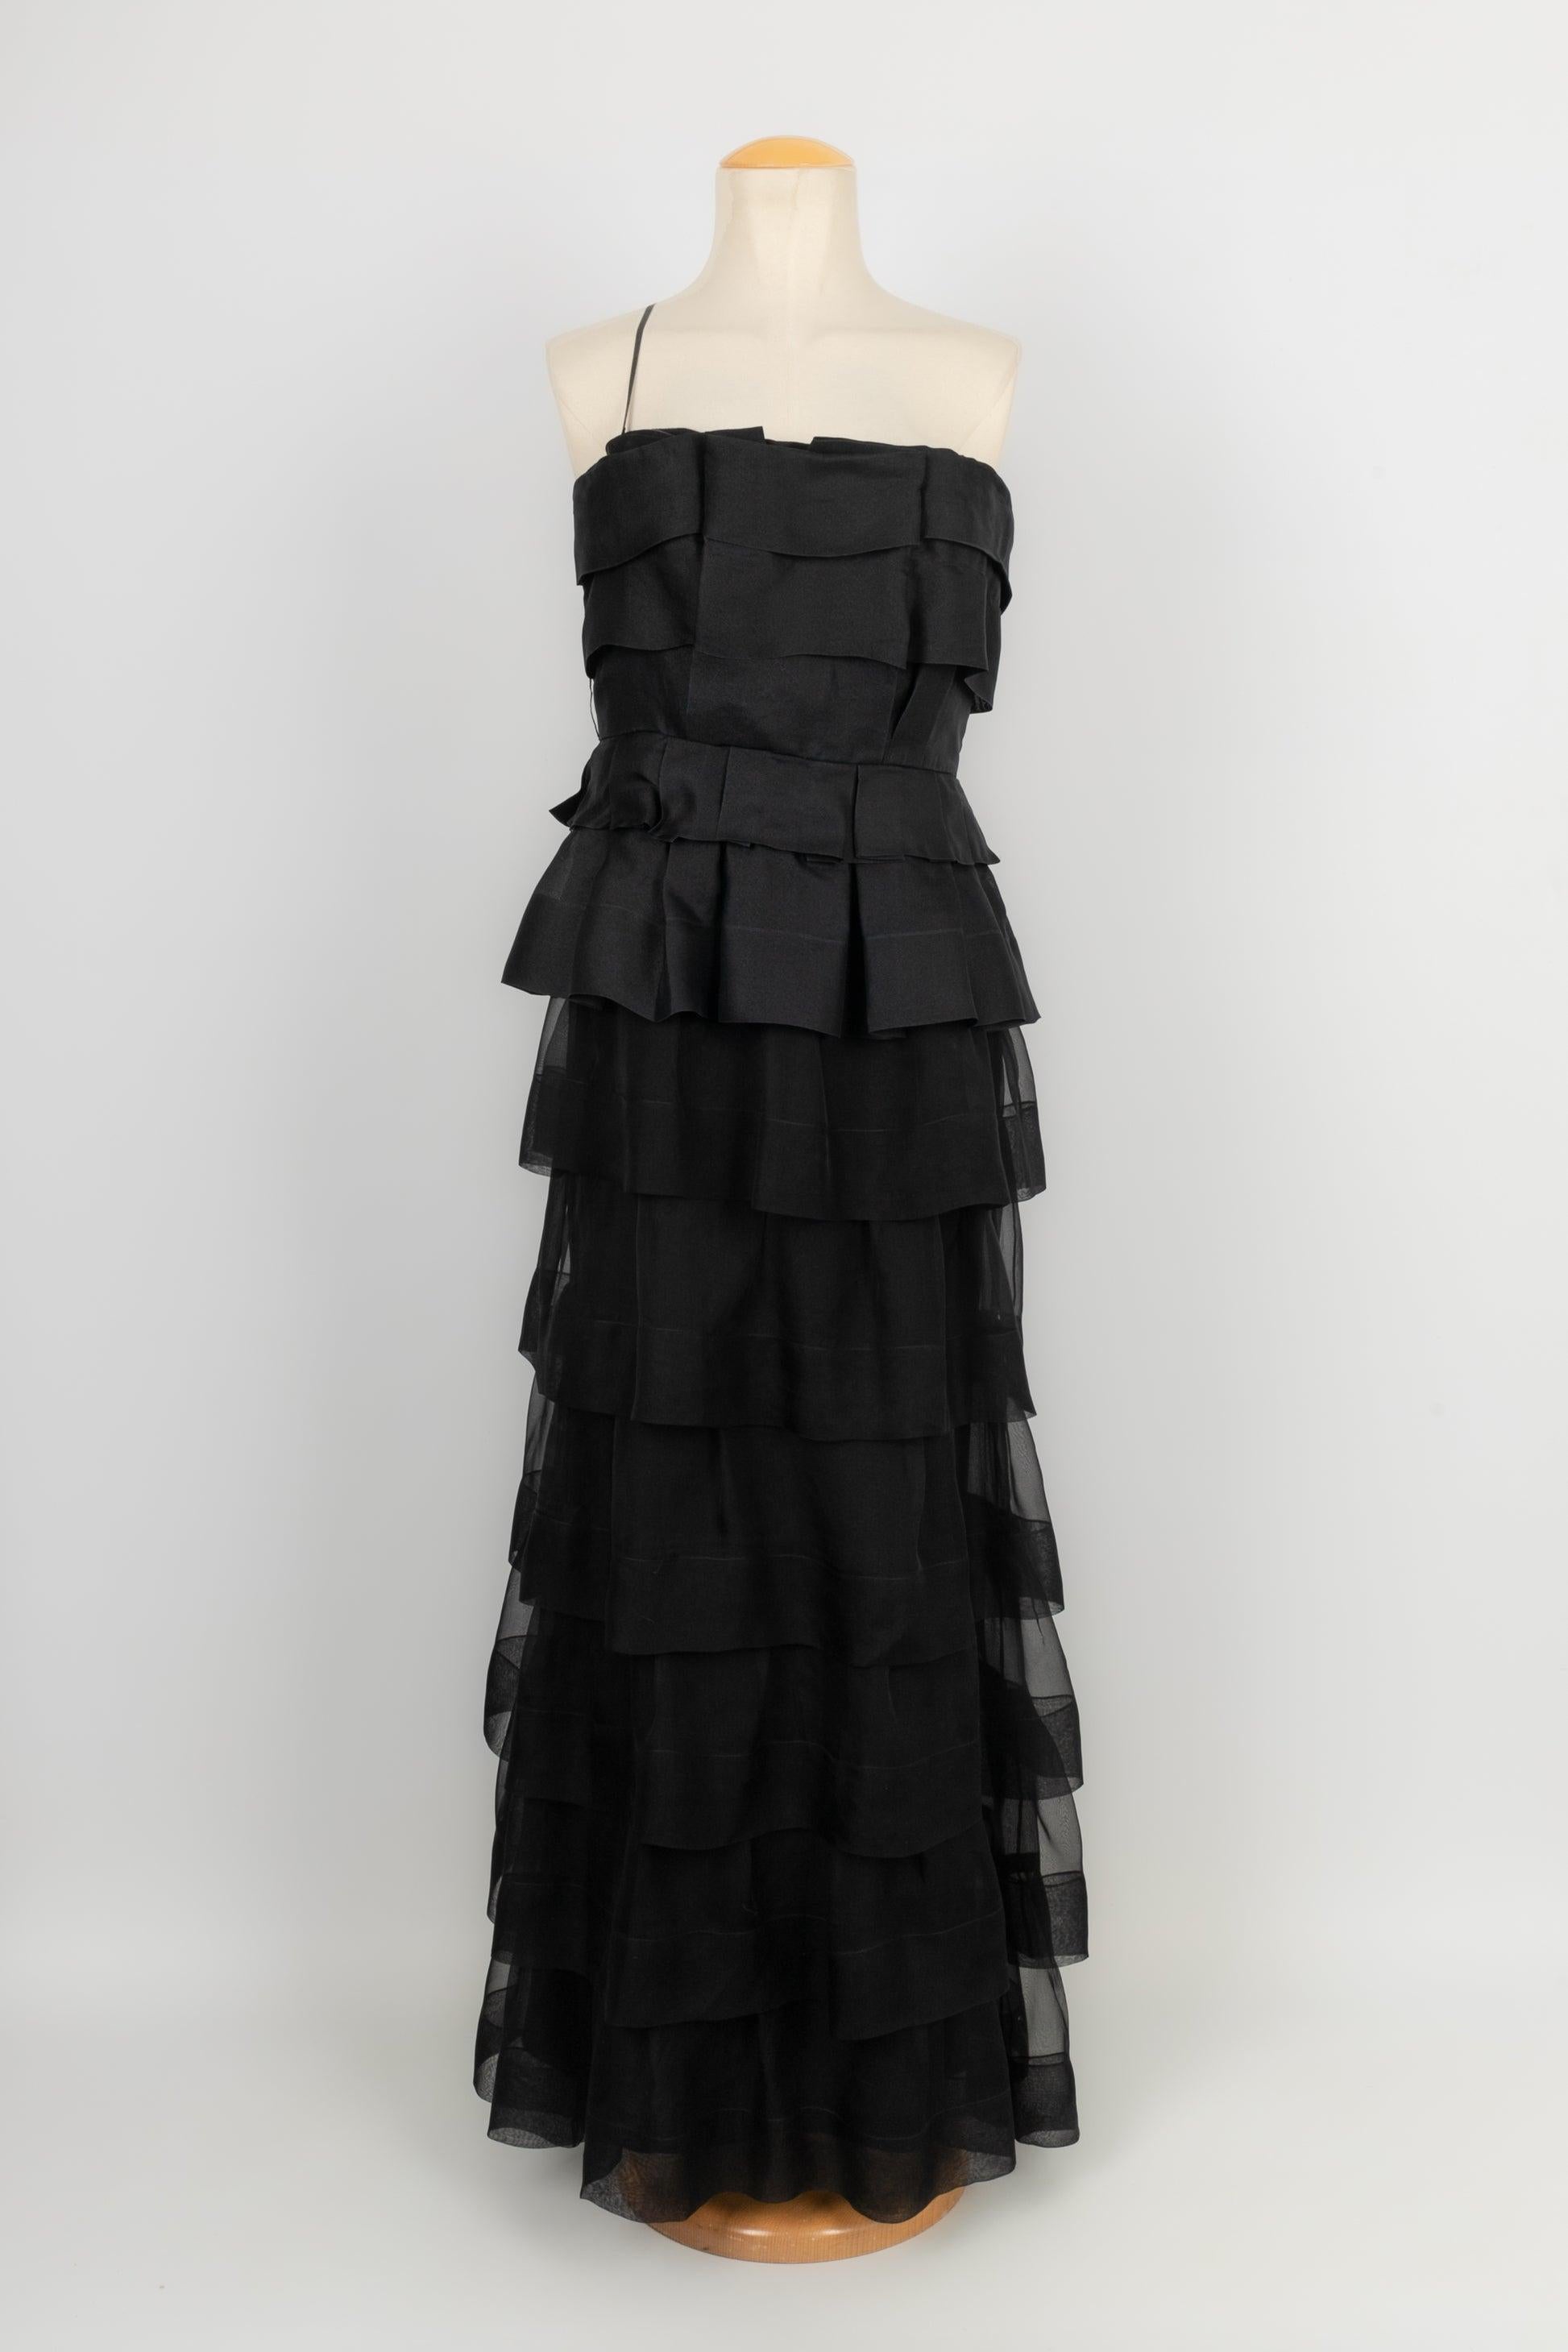 Dior - (Made in France) Black silk flounced bustier dress. Indicated size 42FR. 2009 Collection under the artistic direction of John Galliano.

Additional information:
Condition: Very good condition
Dimensions: Chest: 53cm
Waist: 38 cm
Length: 140